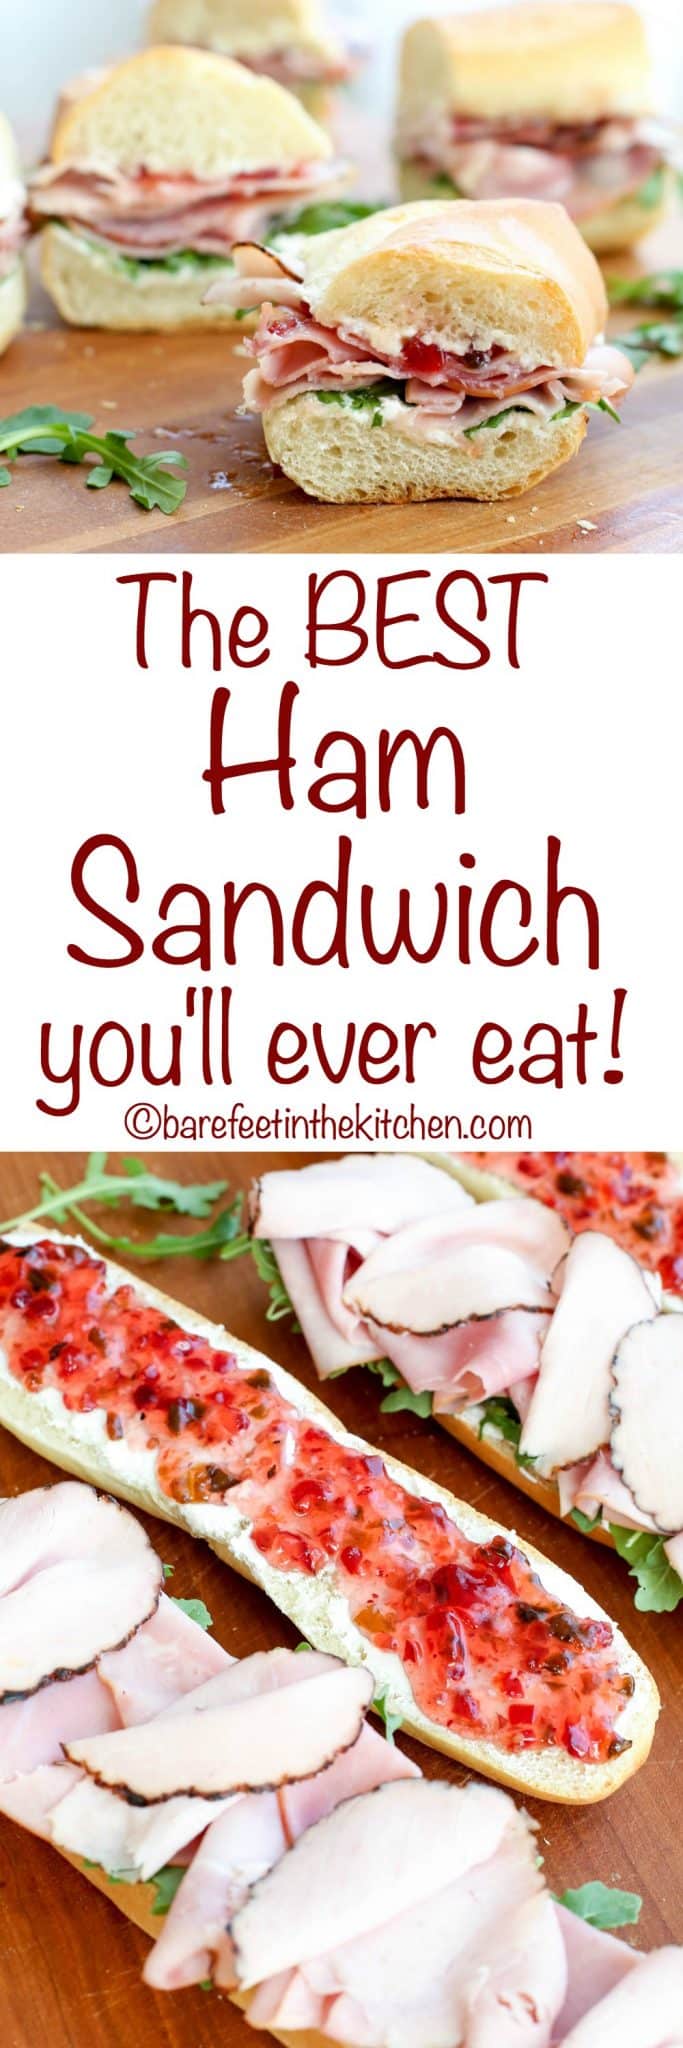 The Best Ham Sandwich Youll Ever Eat Barefeet In The Kitchen